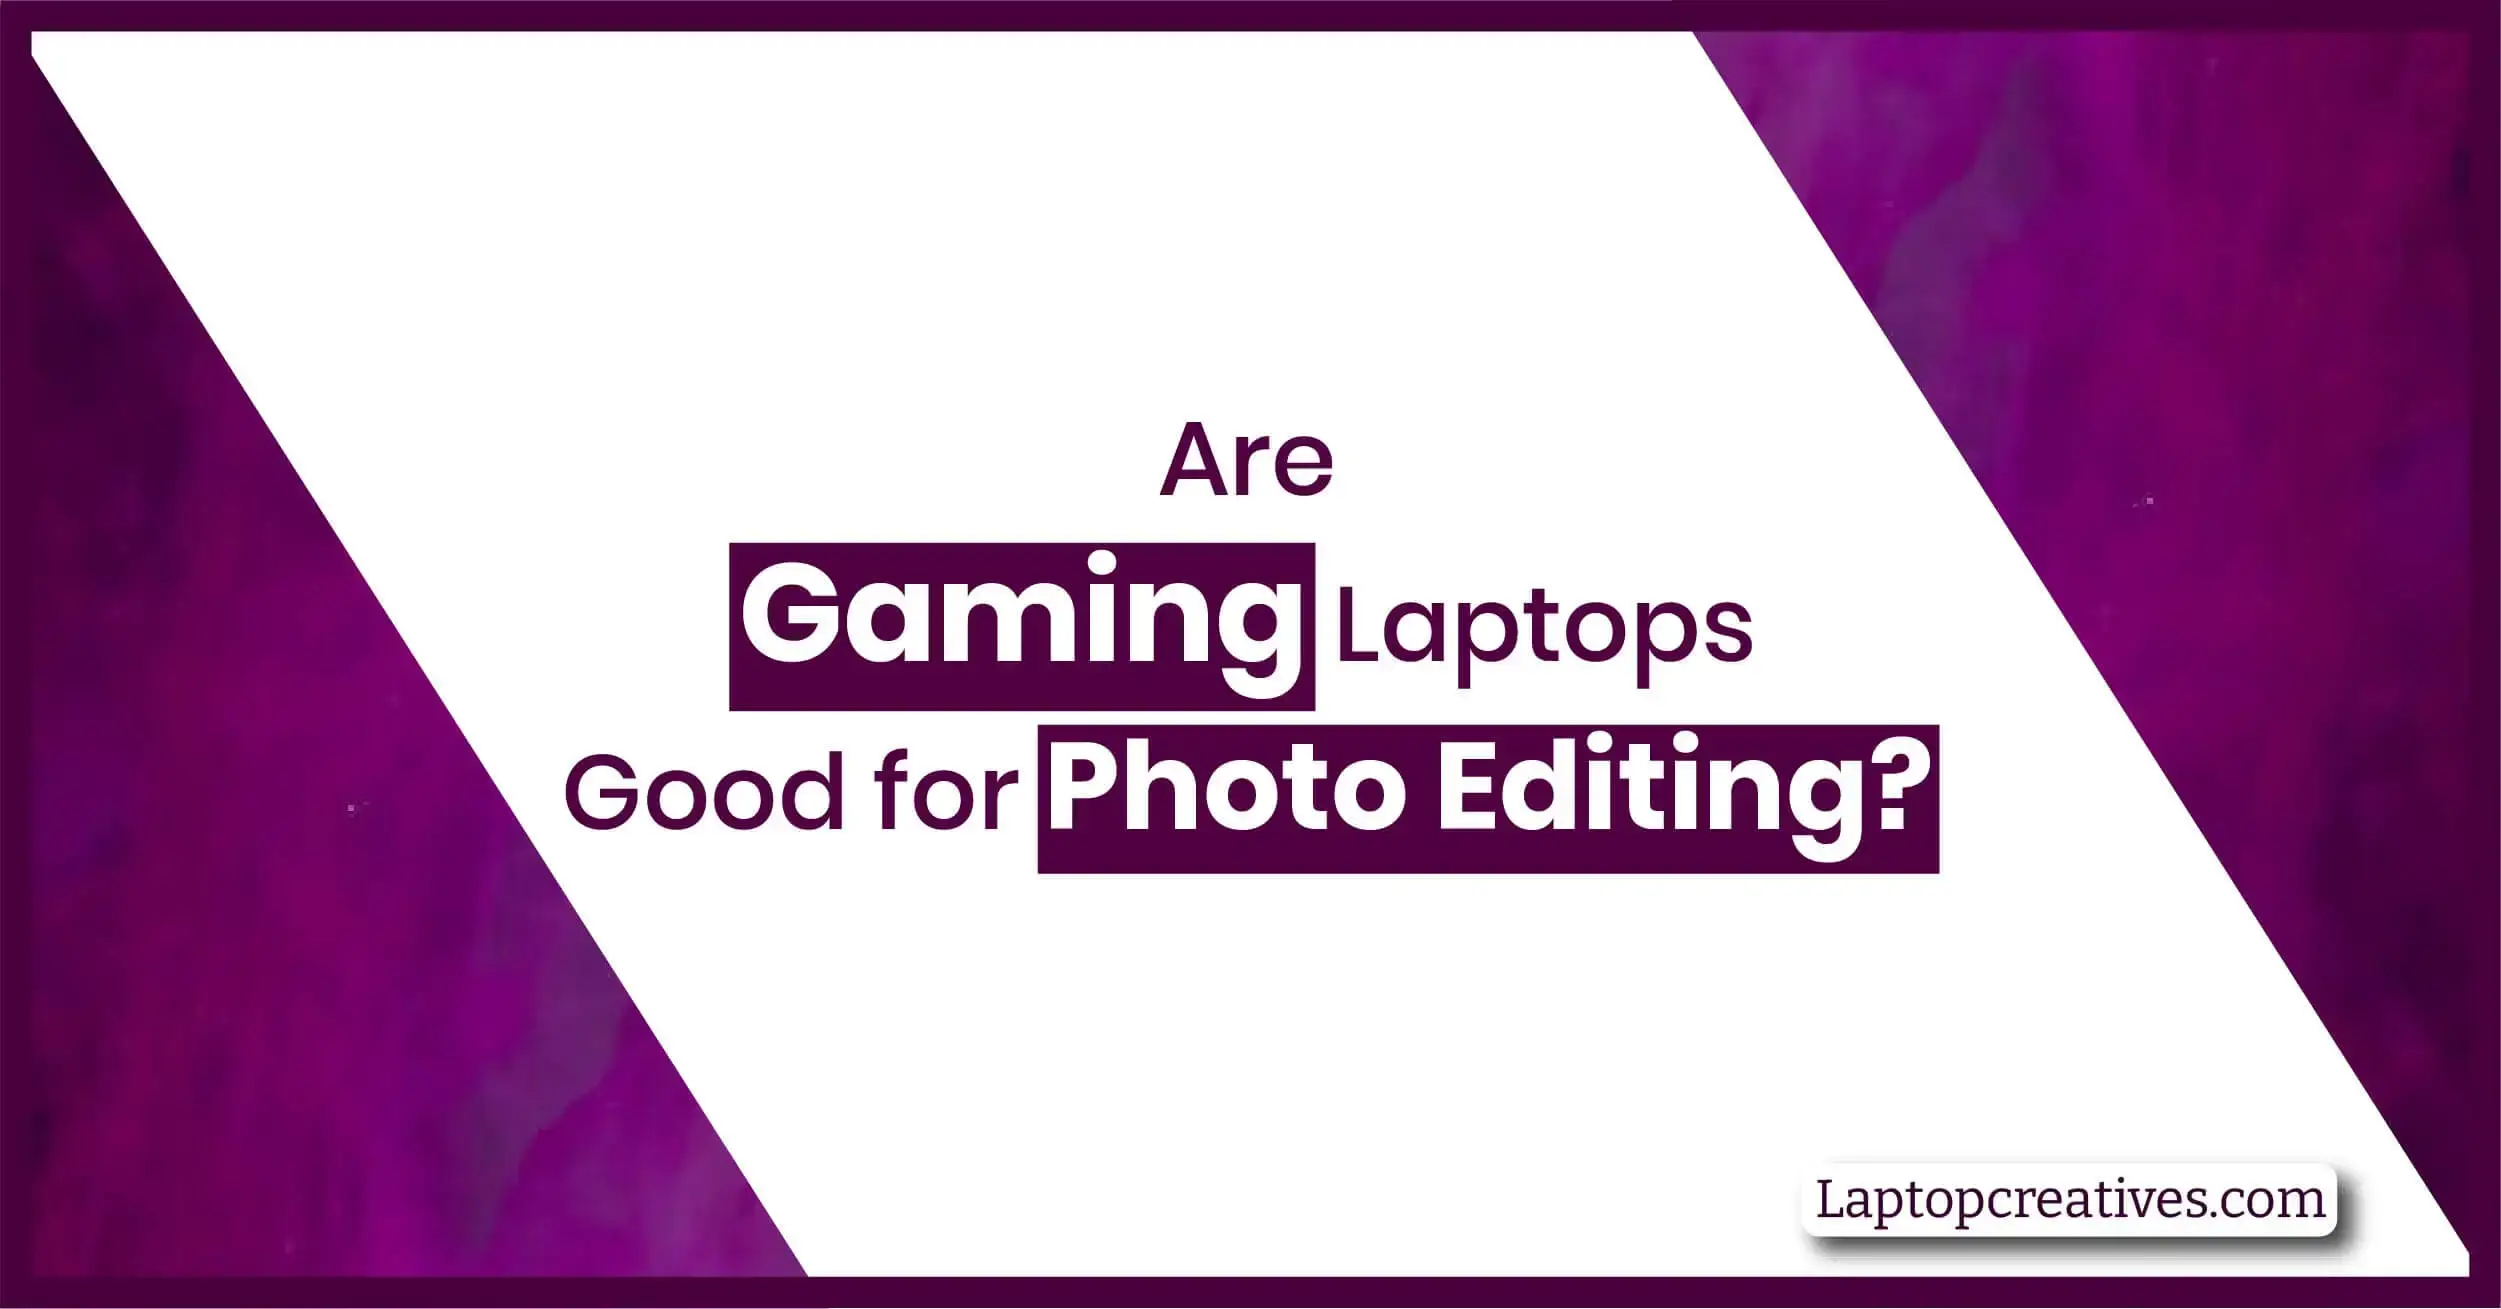 Are gaming laptops good for photo editing